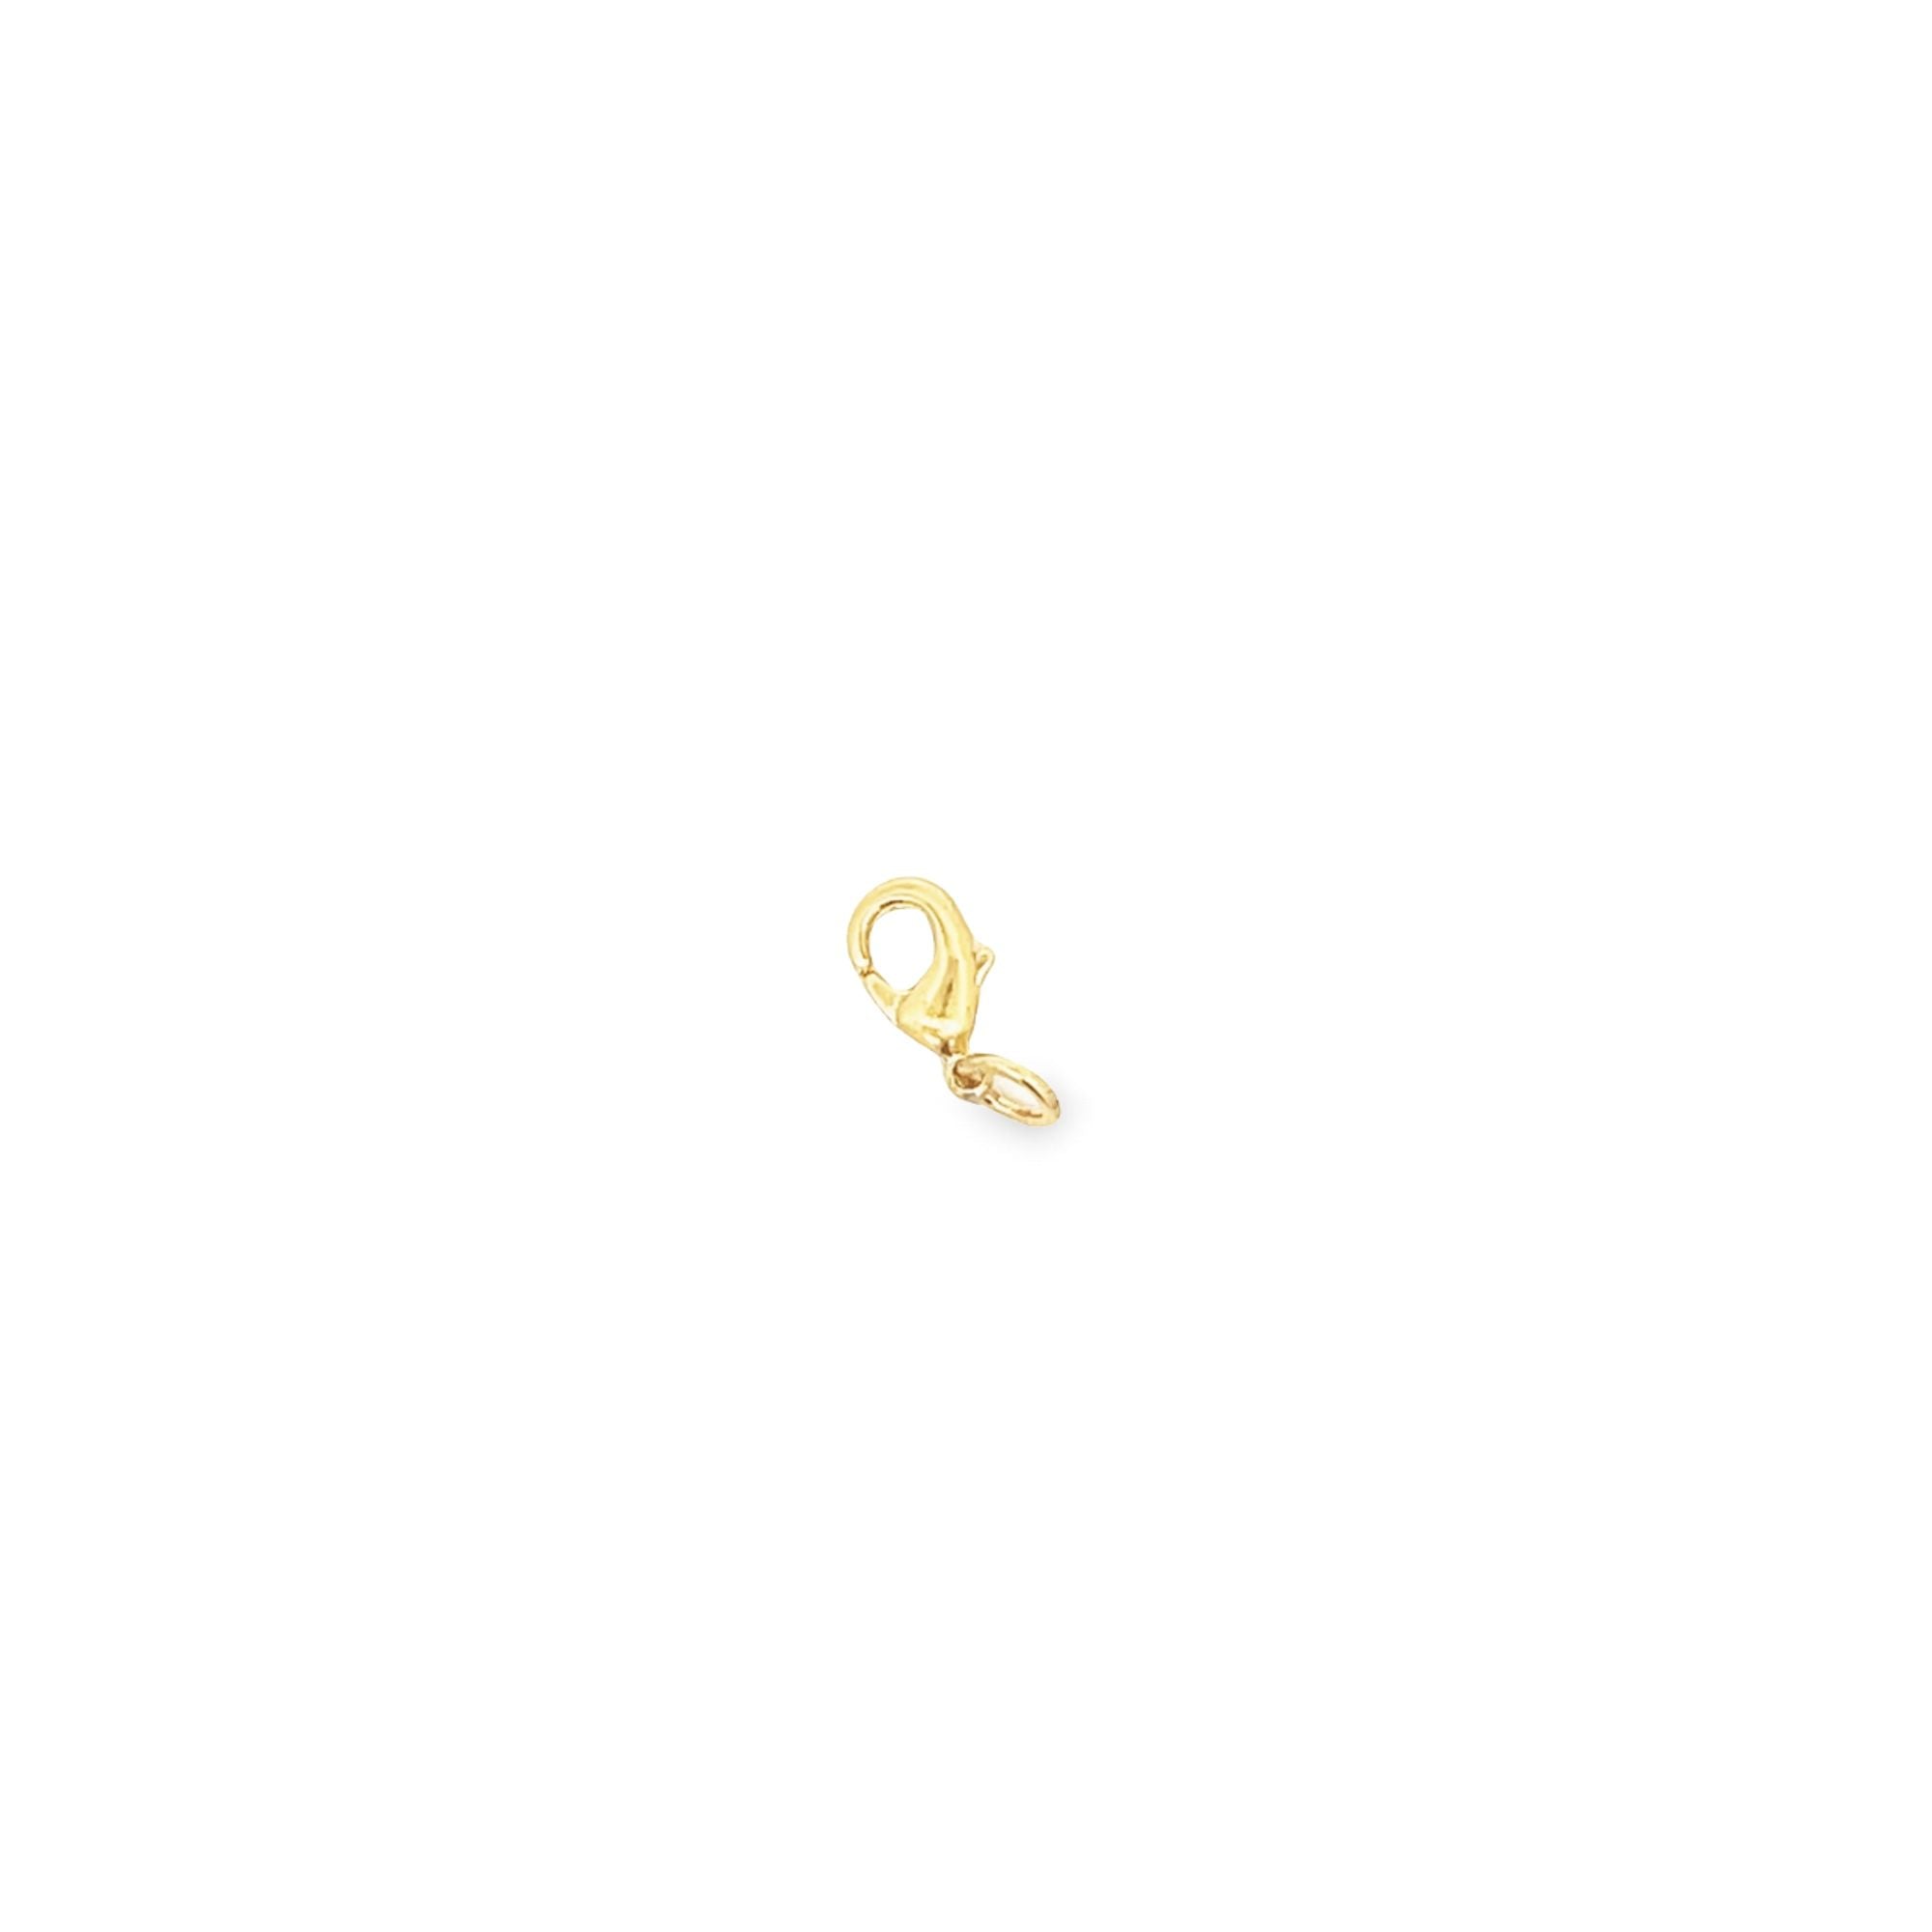 19mm Shiny Gold Lobster Claw Clasp - Pack of 2 – Beads, Inc.